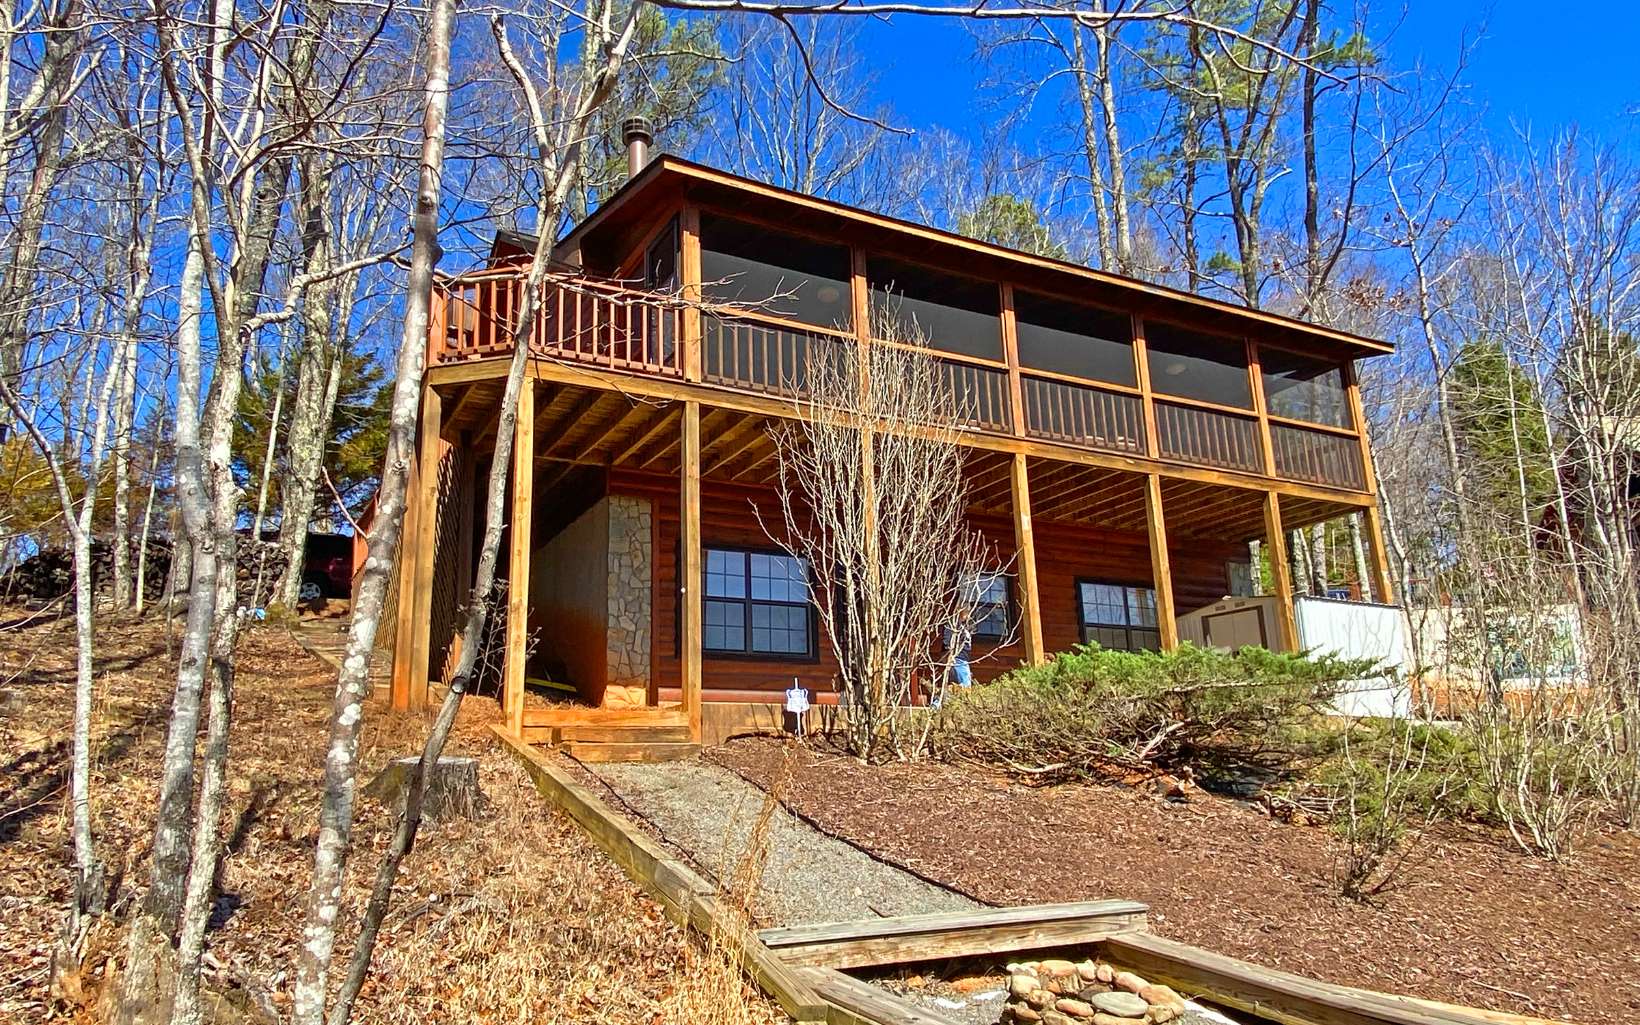 This 3BR, 2BA solid log cabin has 1872 sq. ft., is on .95 AC with YEAR-ROUND, LONG-RANGE LAYERED MOUNTAIN VIEWS! The cabin is offered furnished and borders USFS which offers a hike to access to Lake Blue Ridge. There is a lovely screened-in back deck to take in the fantastic view and a fire pit area for evening camp fires. Great room upstairs and large recreation, TV room downstairs. On one of the most scenic ridges in the area, this cabin is perfect for full-time living, a rental program, or simply a vacation or weekend home. Located only 15 minutes from thriving Blue Ridge. All-paved road access! Hiking out your front door, a 15-minute drive to Toccoa River trout fishing spot, and only a 30-minute drive to Ocoee Whitewater Rafting, this cabin will not last long. STR allowed.